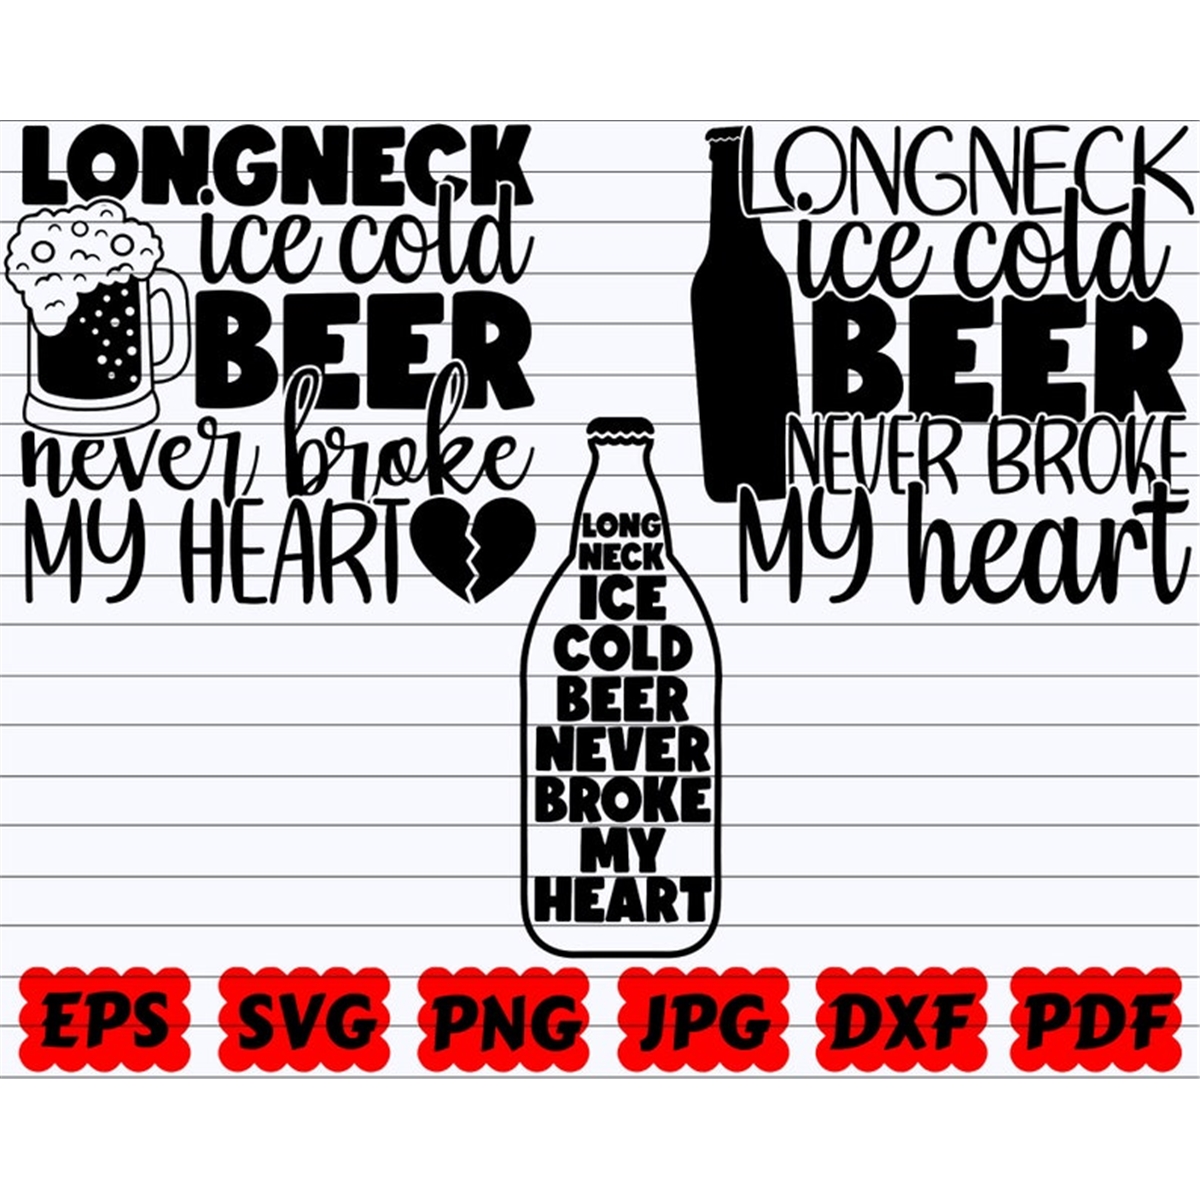 longneck-ice-cold-beer-never-broke-my-heart-svg-ice-cold-image-1